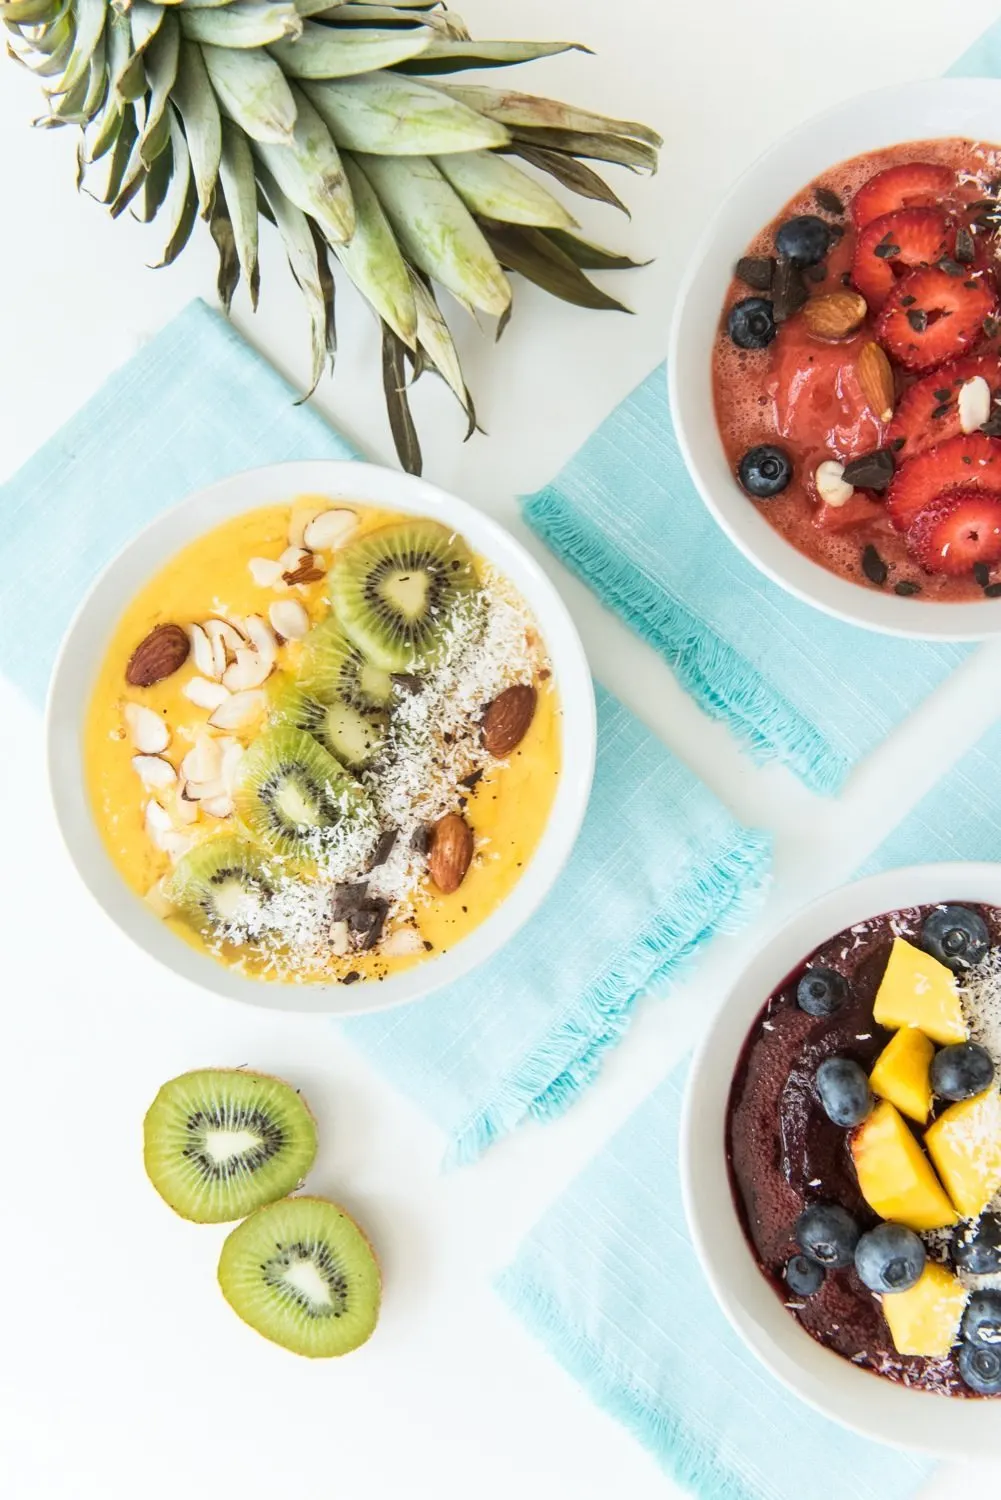 Summer Smoothie Bowl Recipe | 12 Summer Smoothies plus loads of party recipes, entertaining tips, cocktail recipes and more from @cydconverse